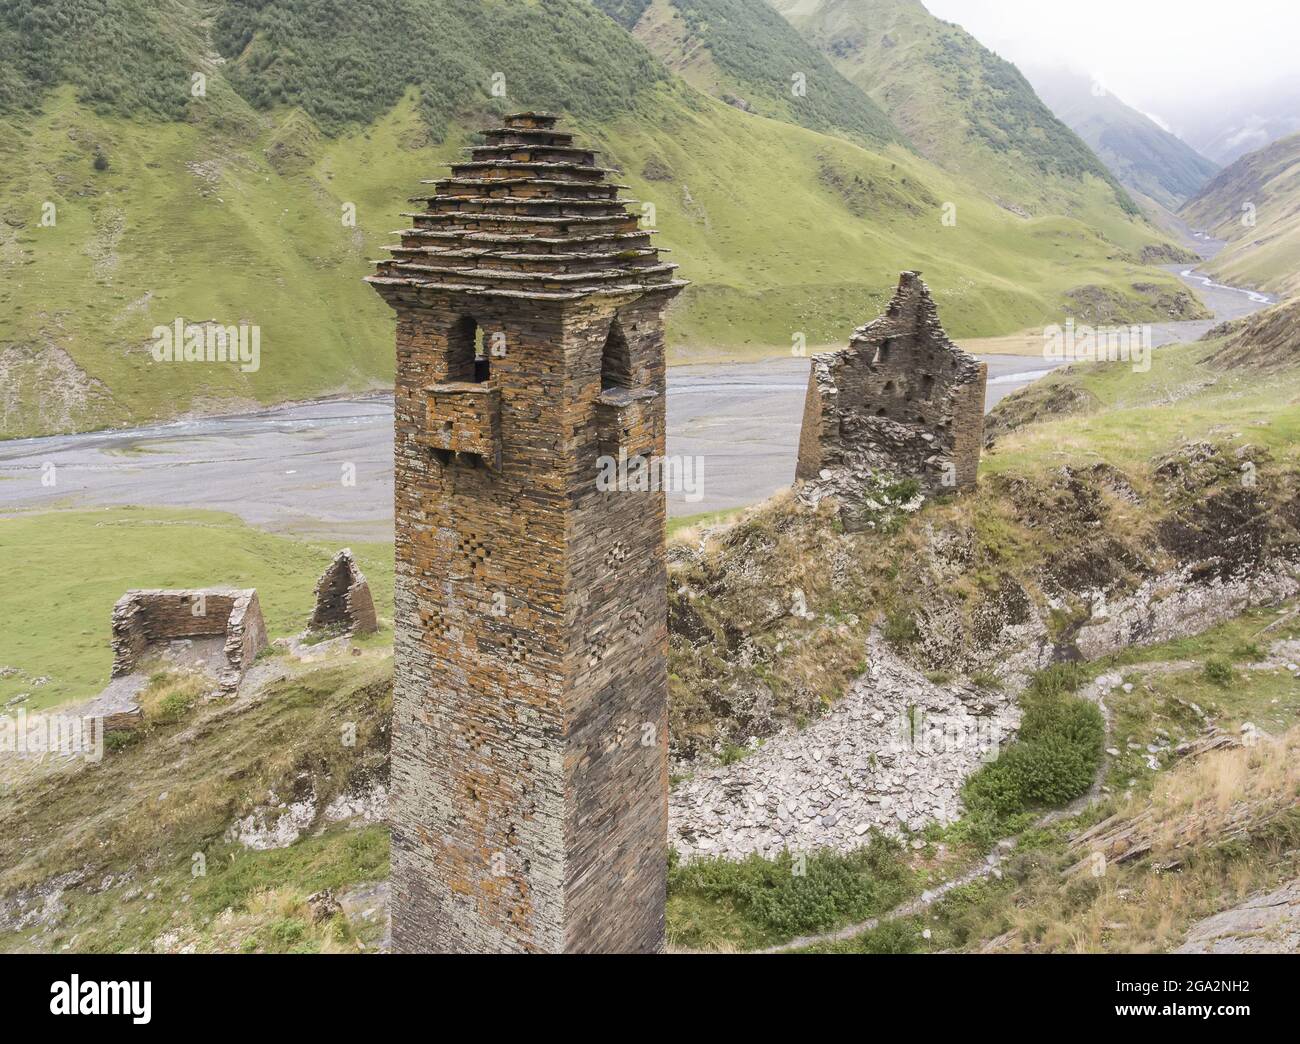 The ruins of abandoned stone watch towers, one with the traditional step pyramidal roof, at the mountainside village of Girevi in the Tusheti Natio... Stock Photo